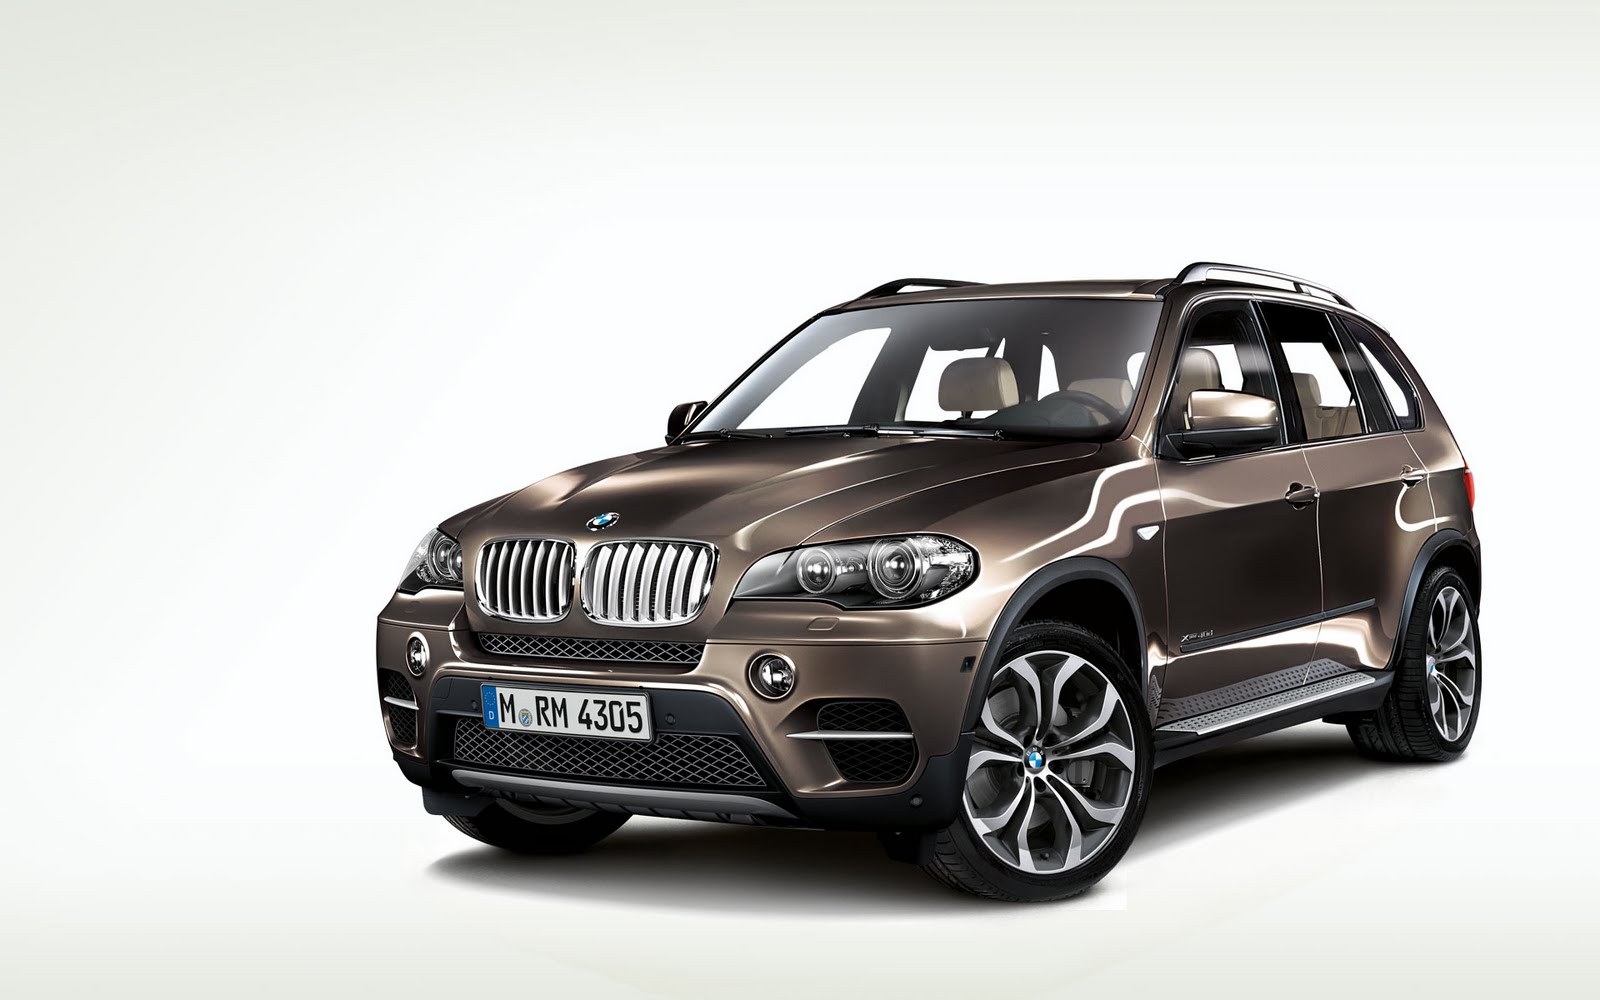 On this page we present you the most successful photo gallery of BMW X5 SAV